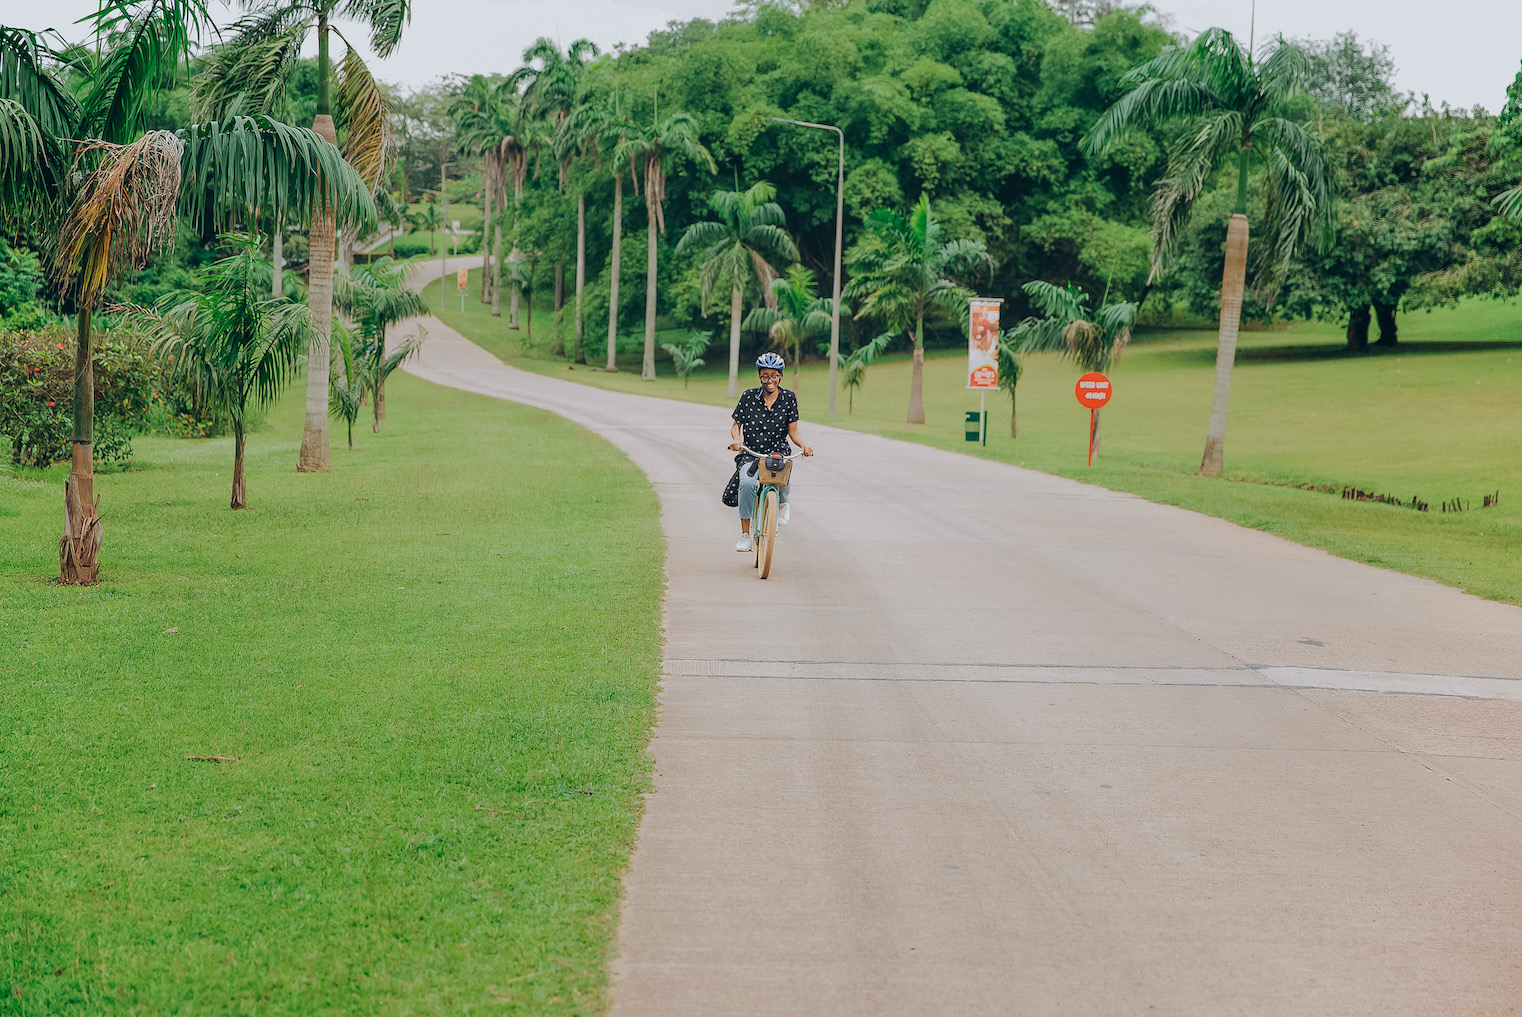 Cassie Daves riding a bicycle at IITA hotel ibadan